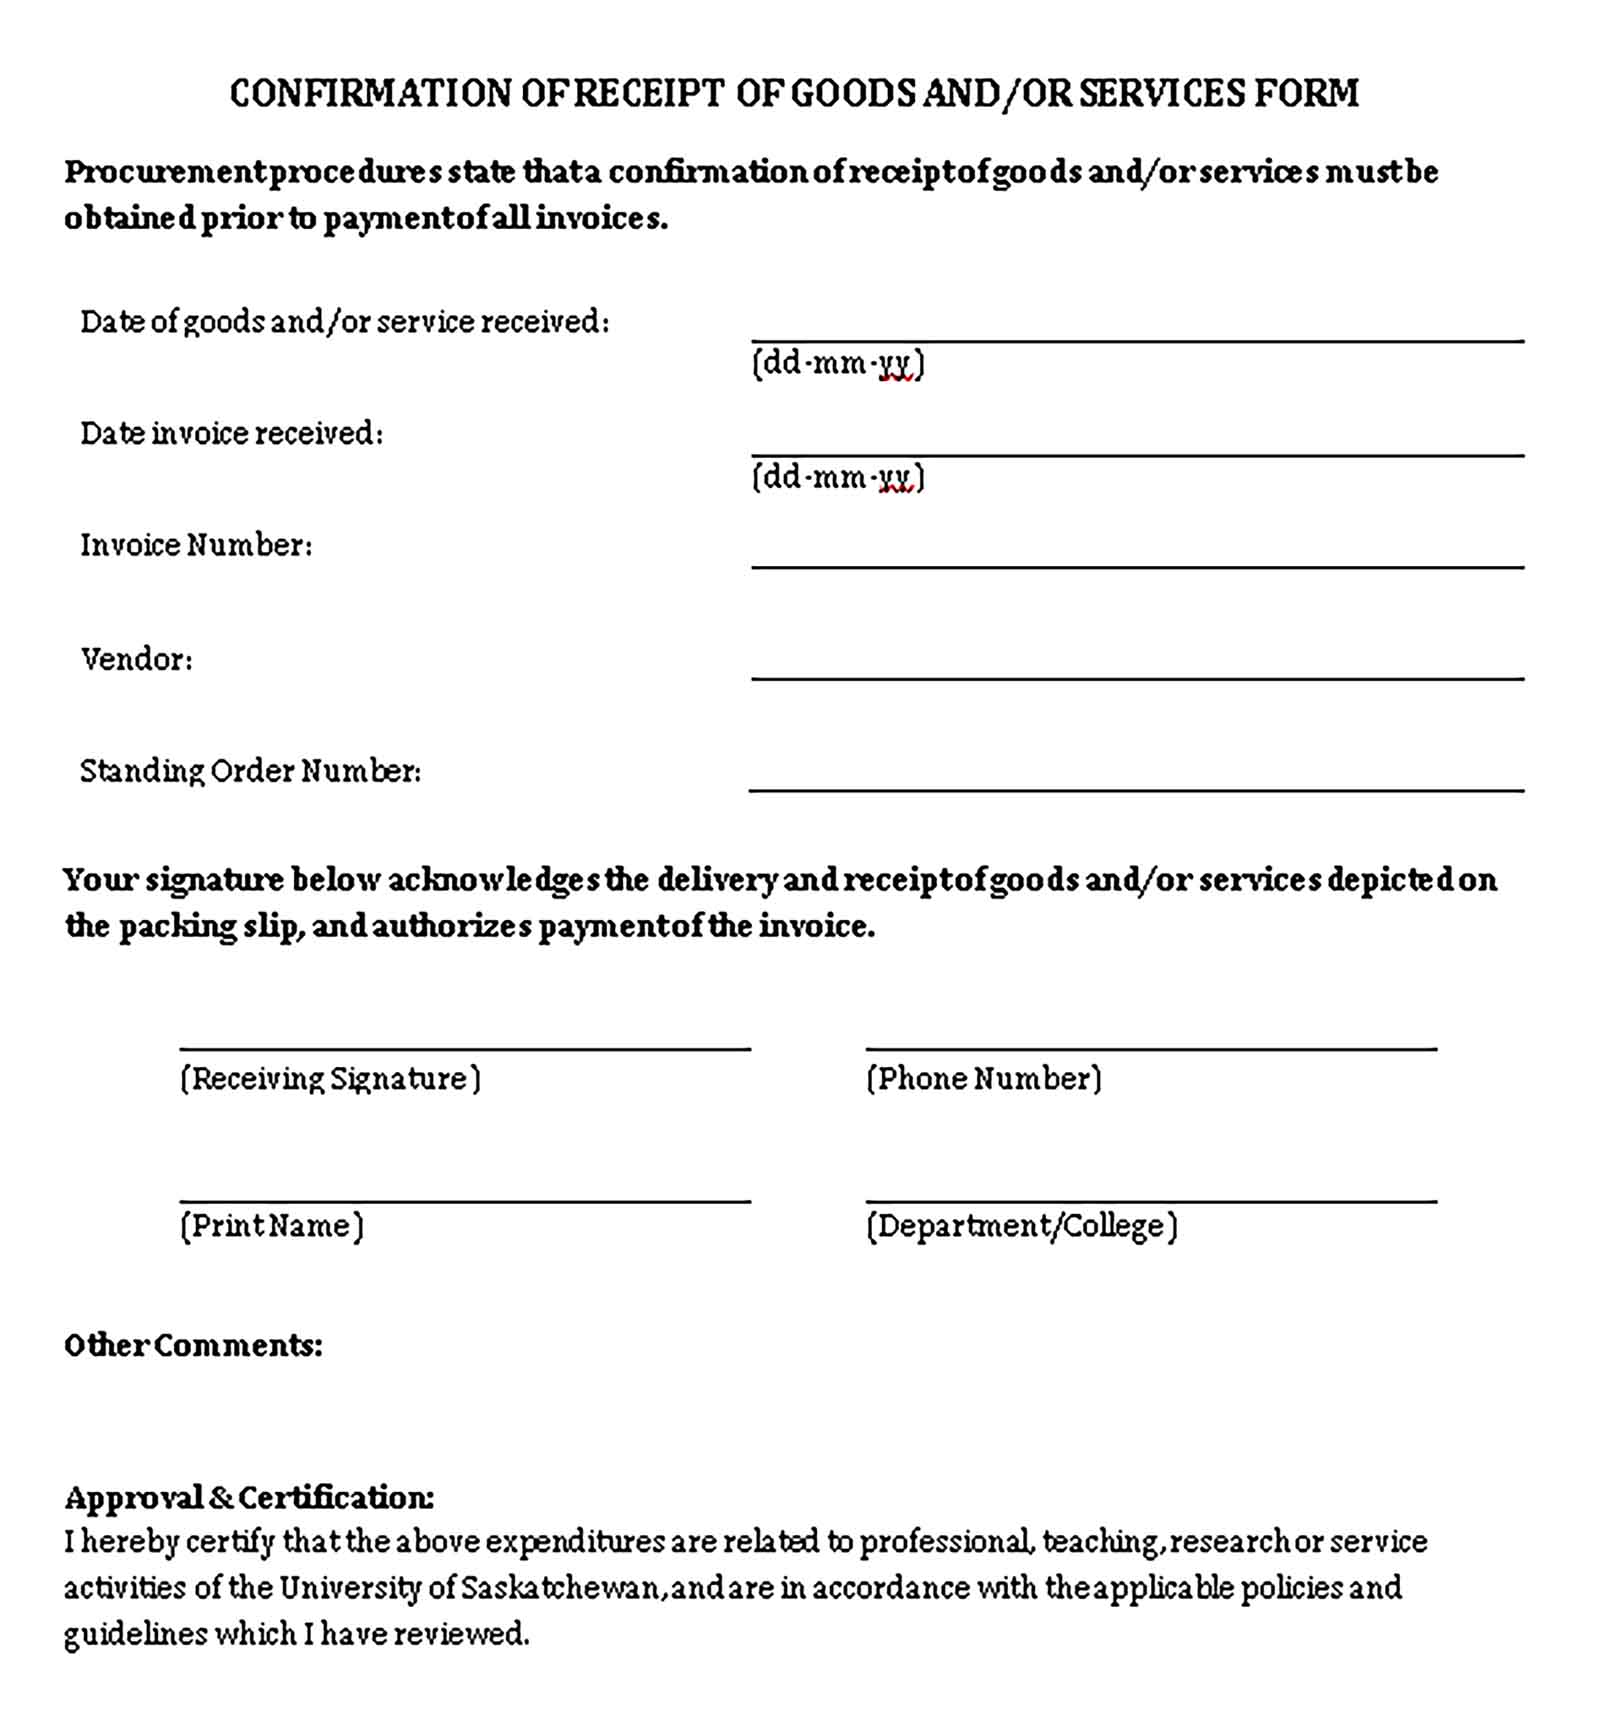 Sample Confirmation of Receipt of Goods and Services Form Templates 1